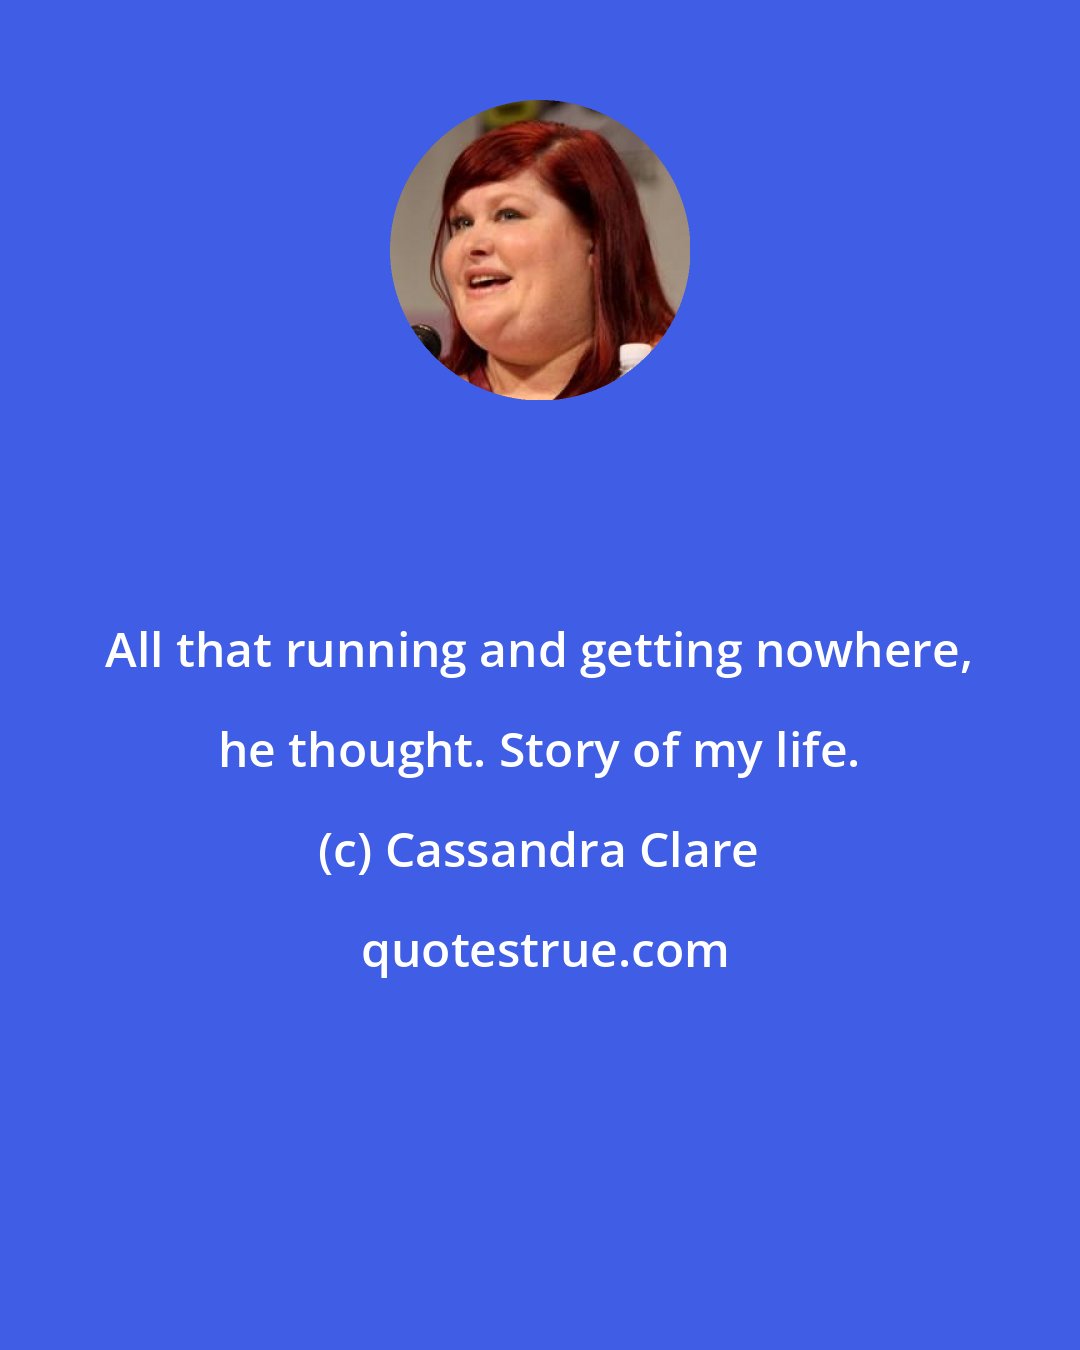 Cassandra Clare: All that running and getting nowhere, he thought. Story of my life.